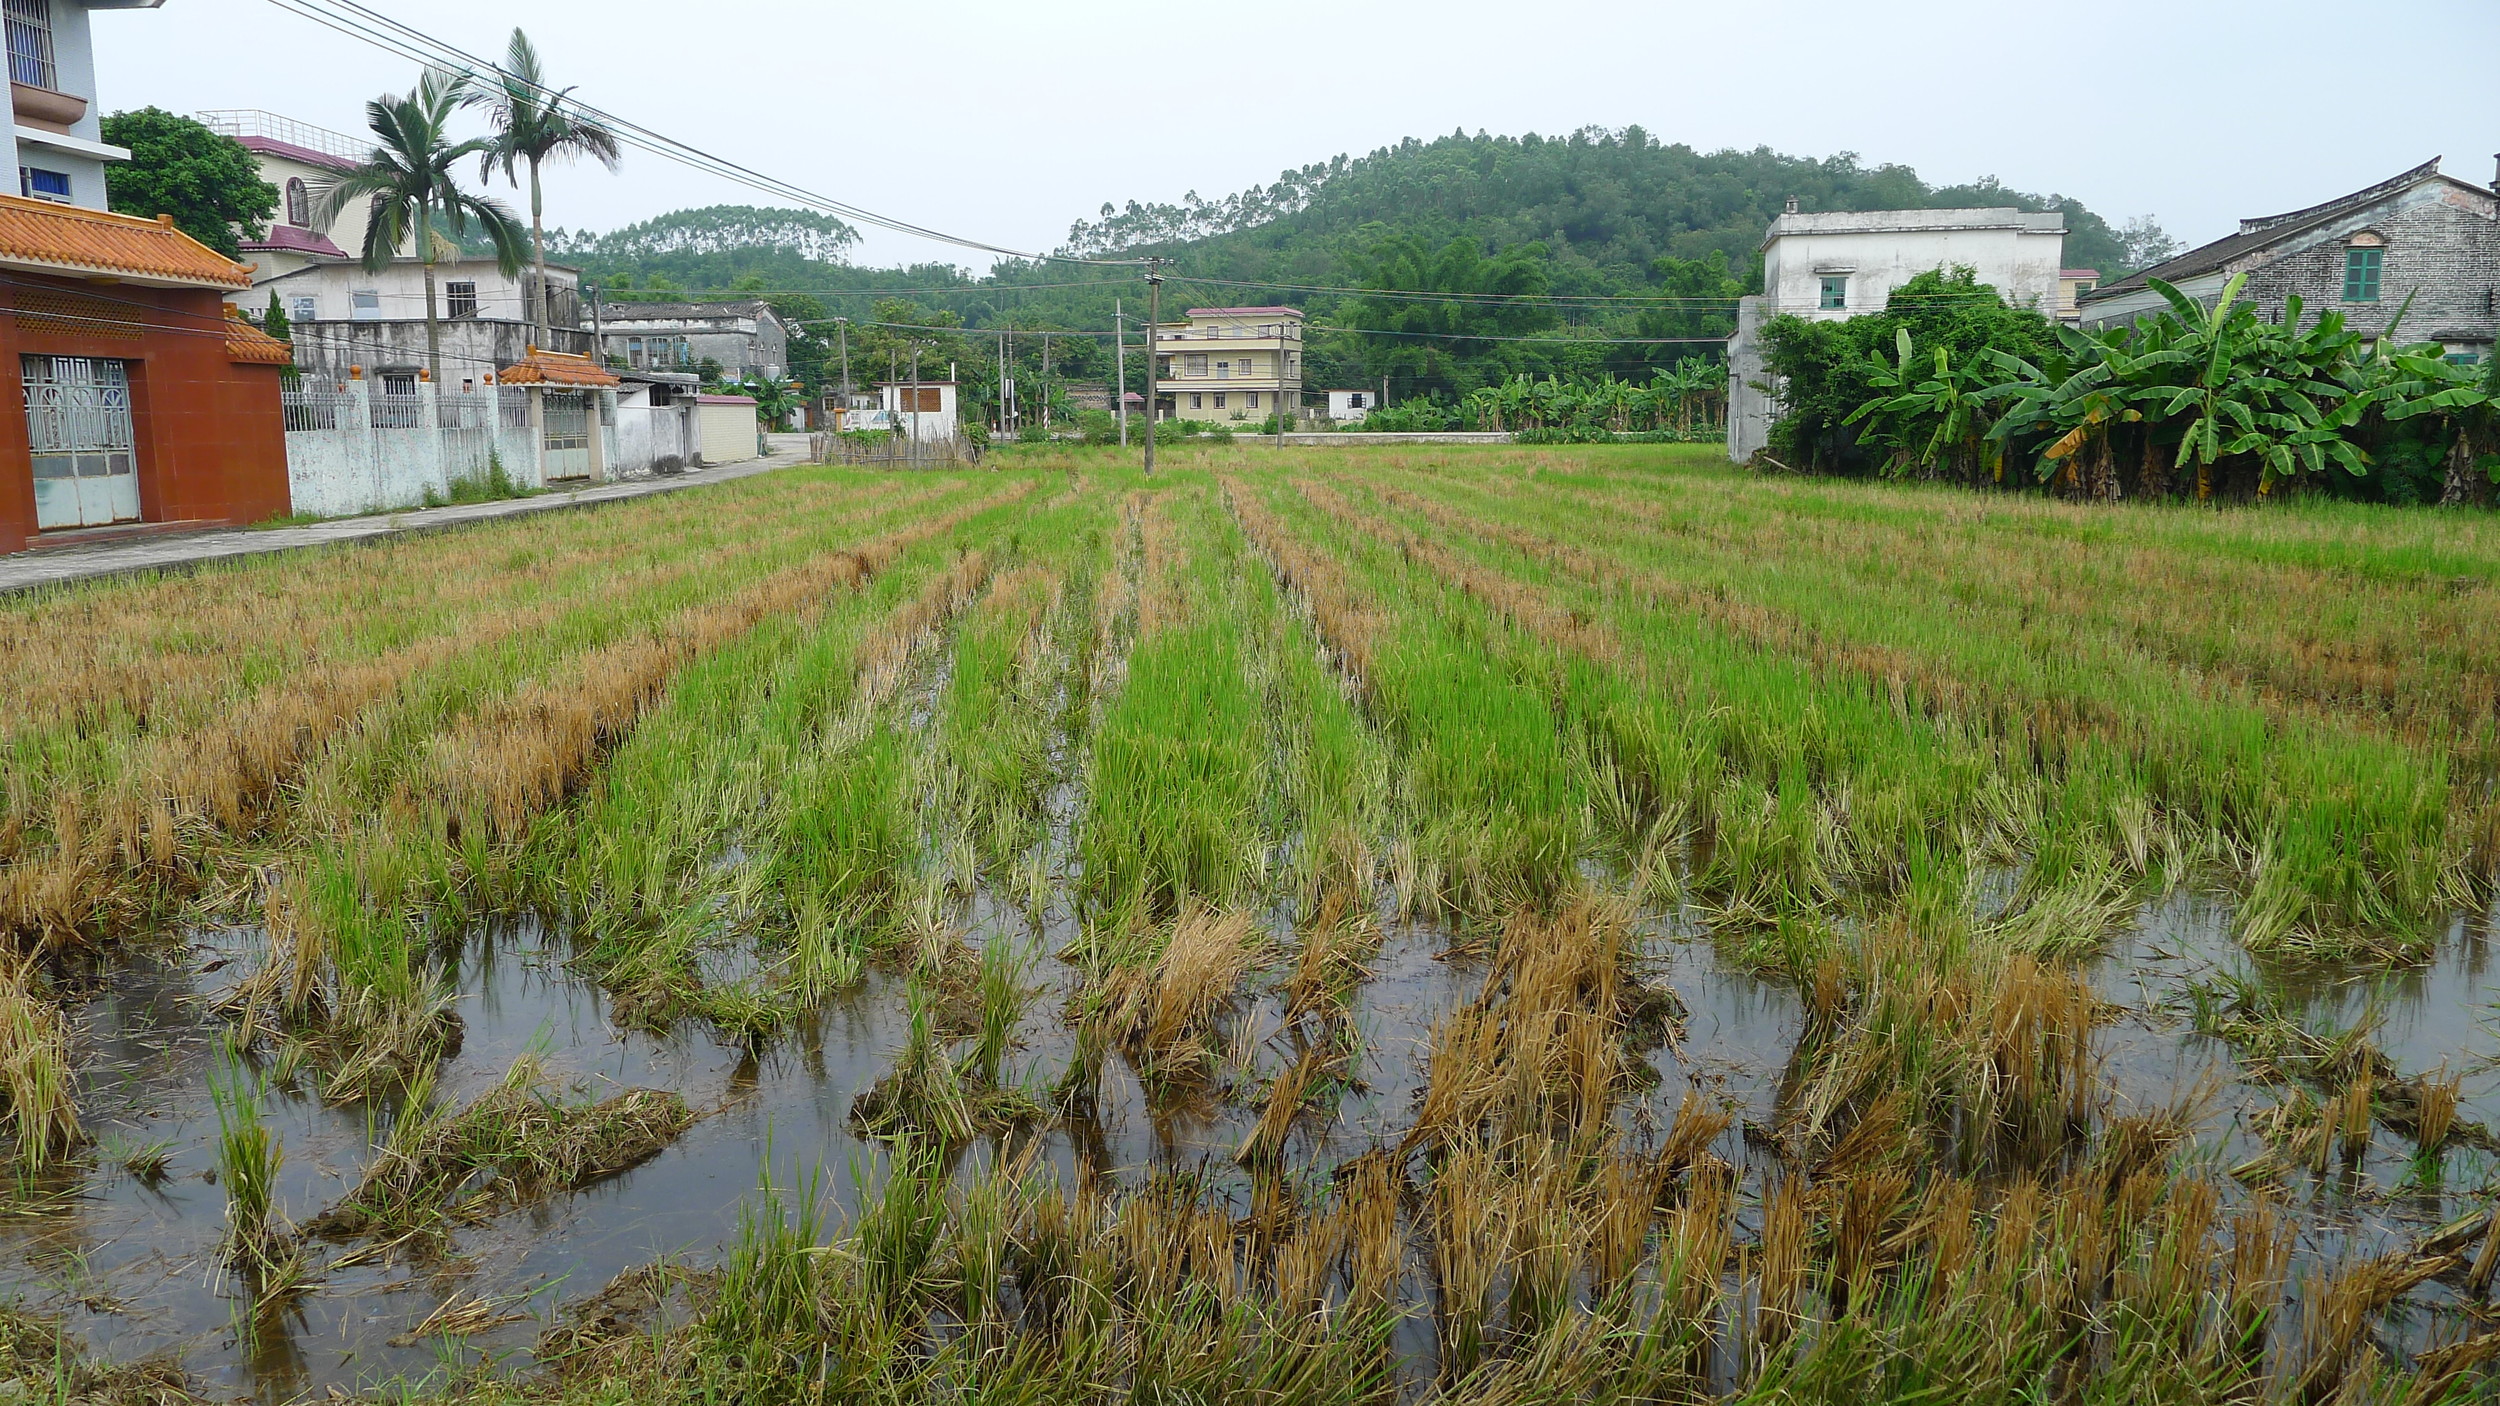 Rice paddies at the entrance of Michelle's maternal grandfather's village, Saam Baat, in Toisan